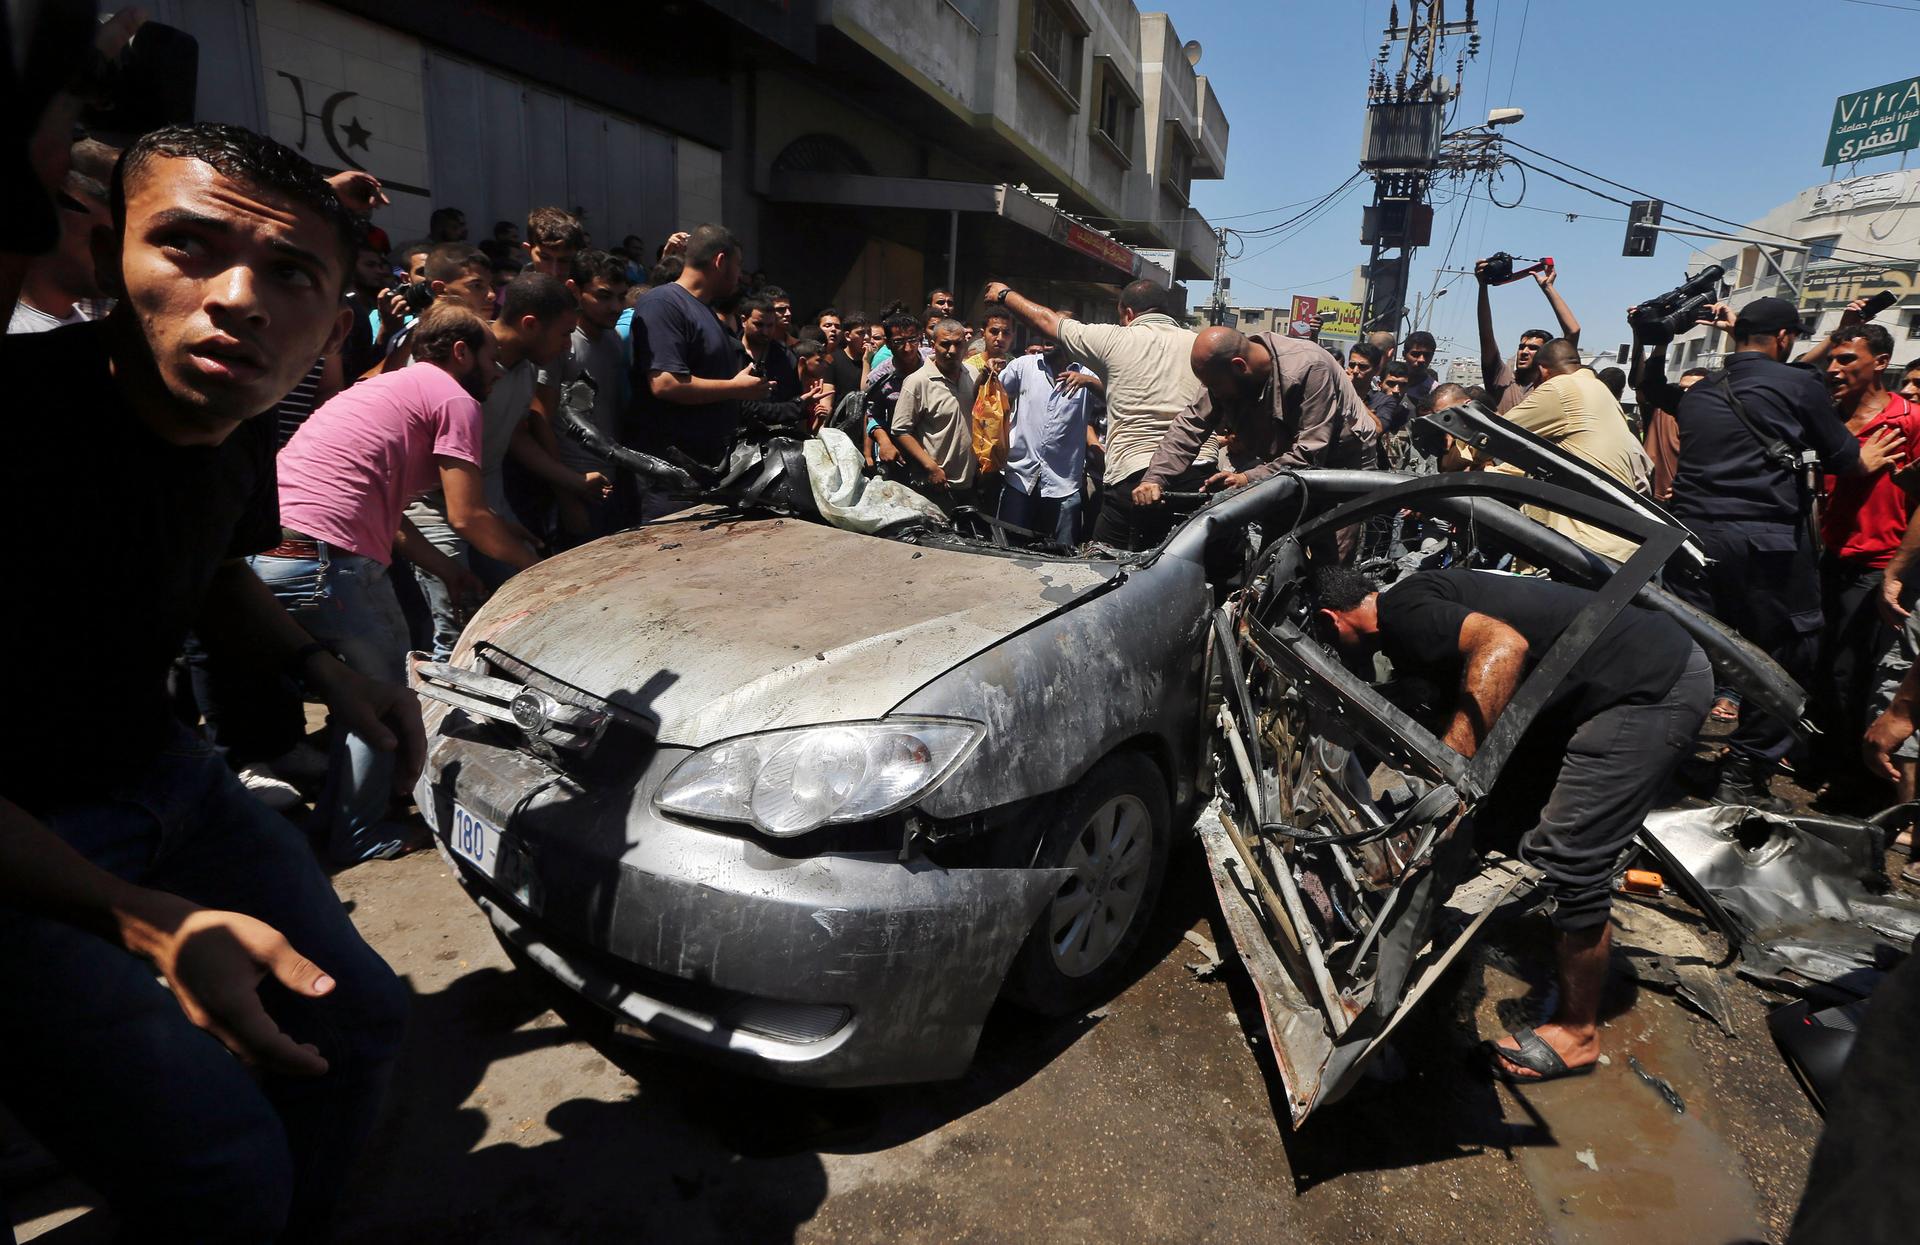 Palestinians in Gaza City gather around the remains of a car which police said was targeted in an Israeli air strike on Tuesday.